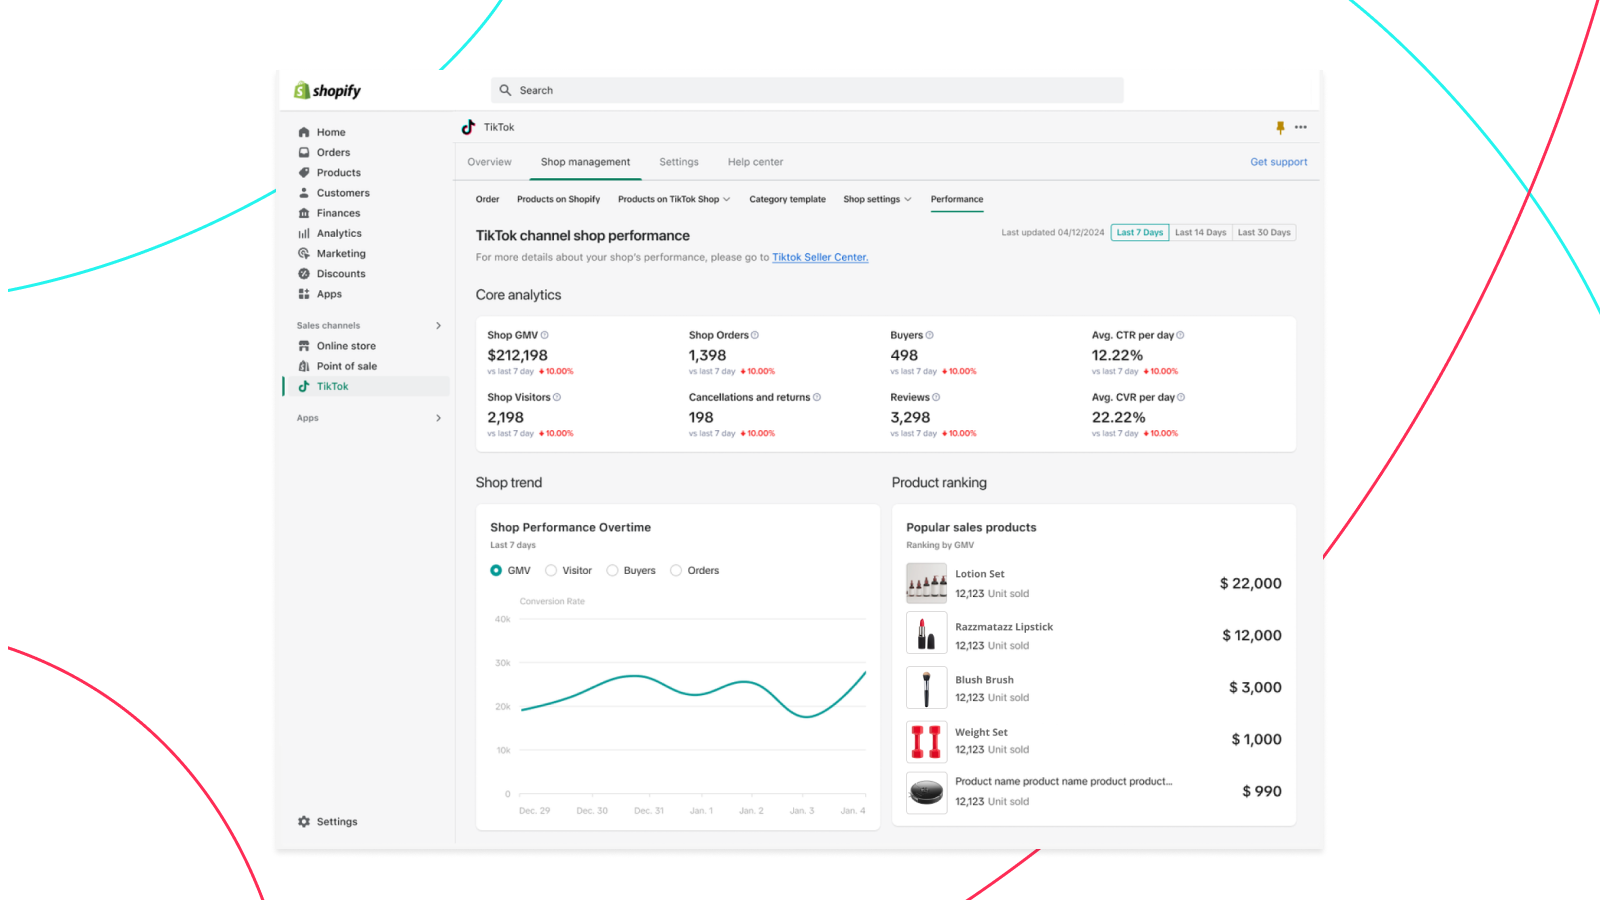 Shop performance page to manage your sales